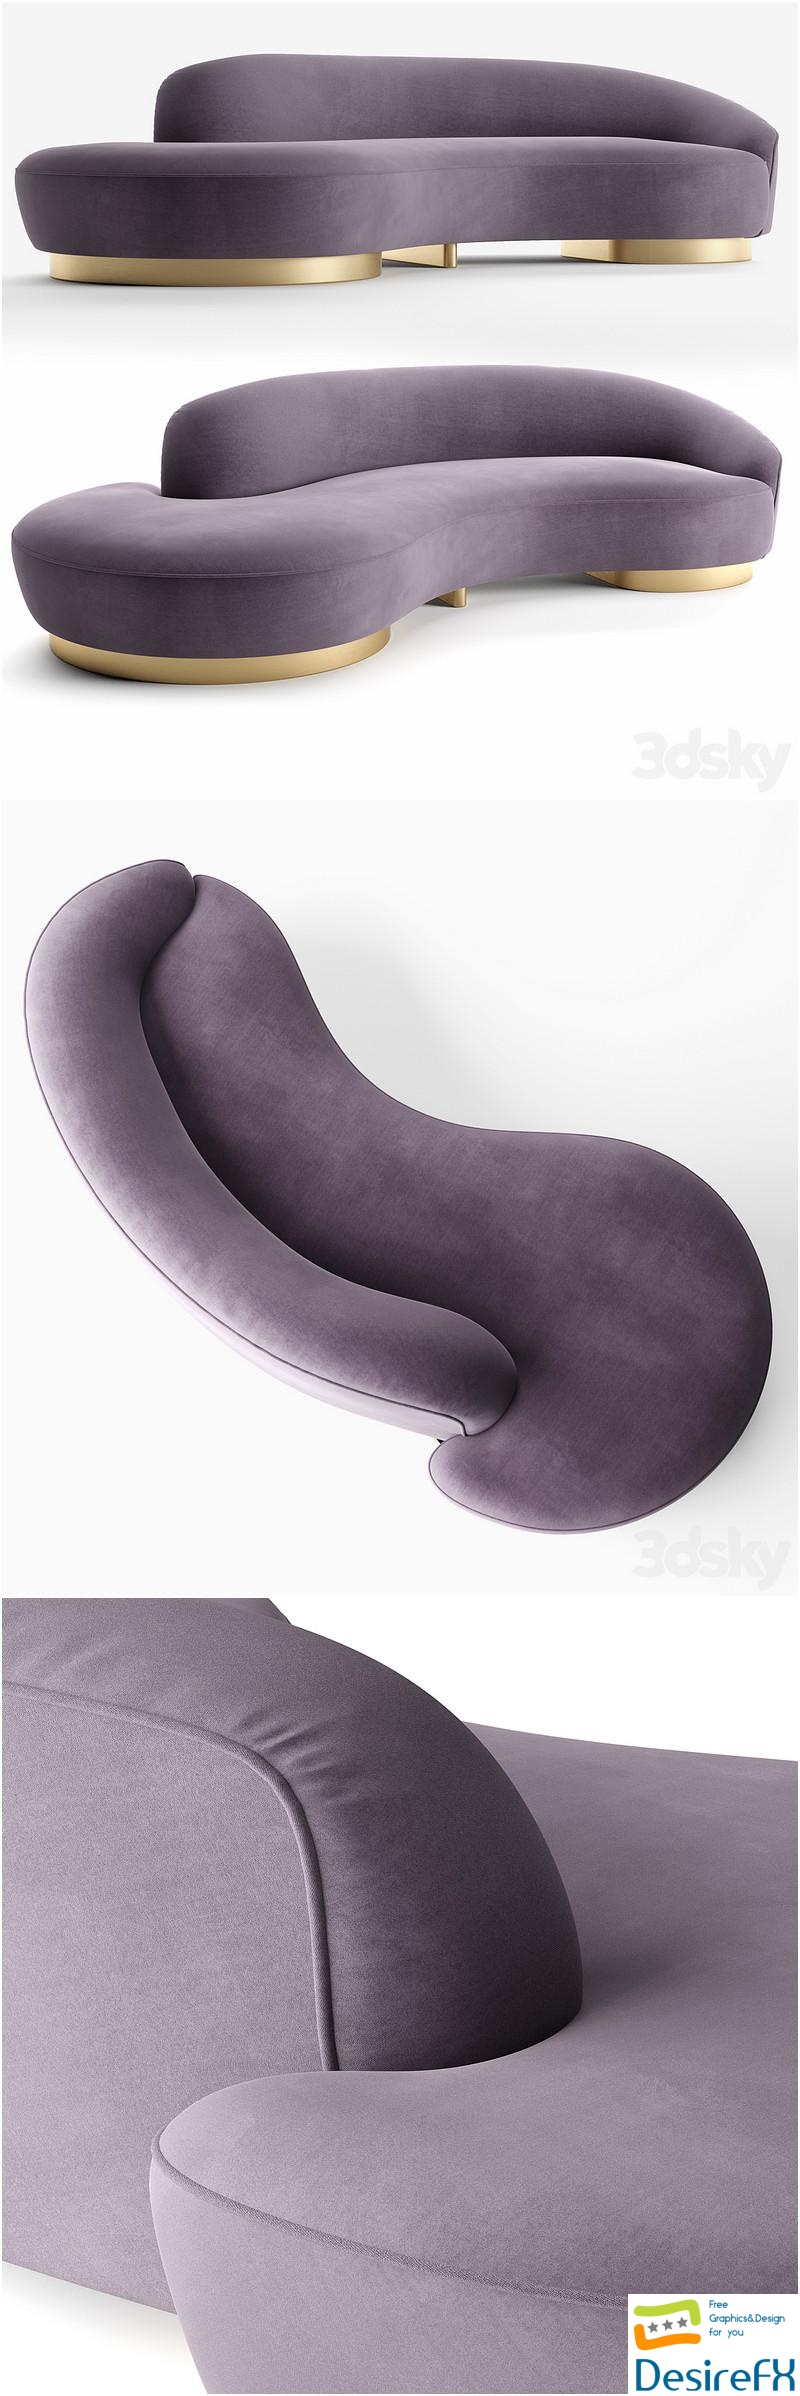 Serpentine Sofa with Arm 3D Model